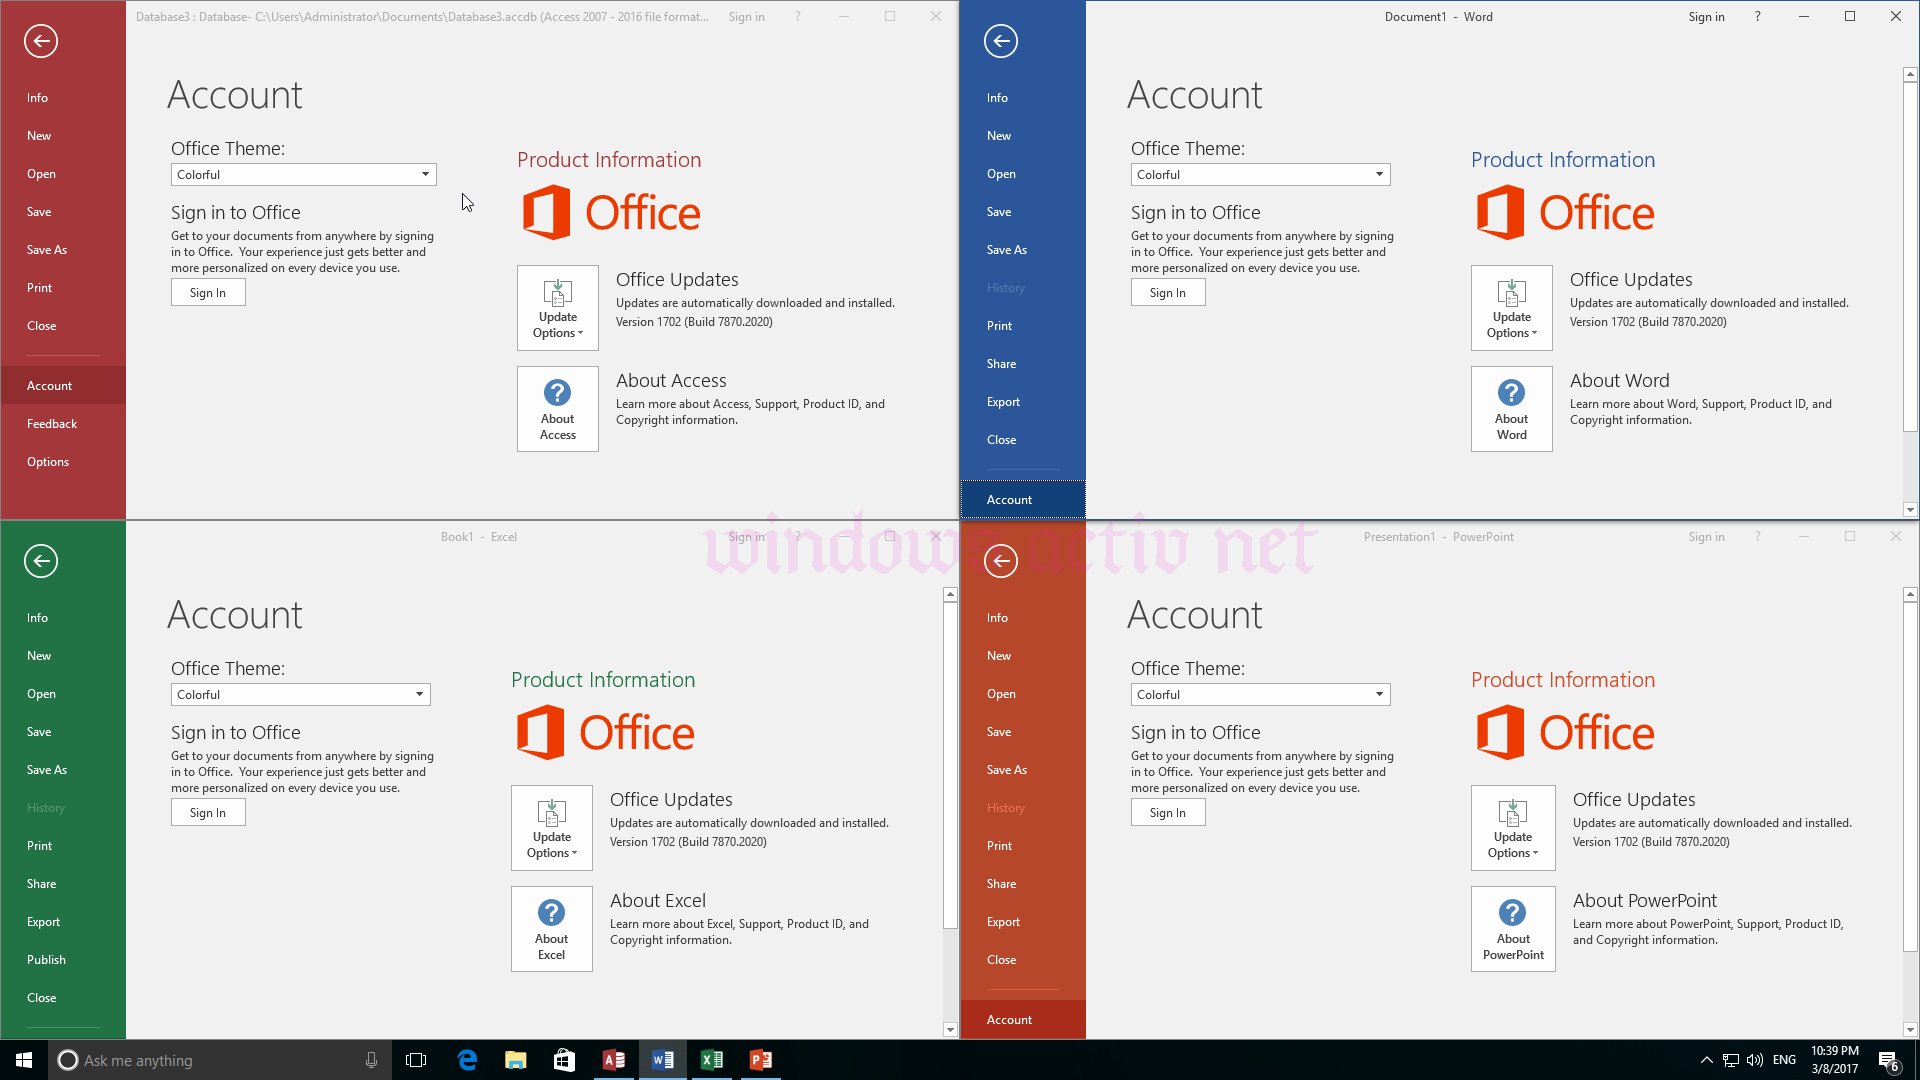 manually activate office 2016 with kms